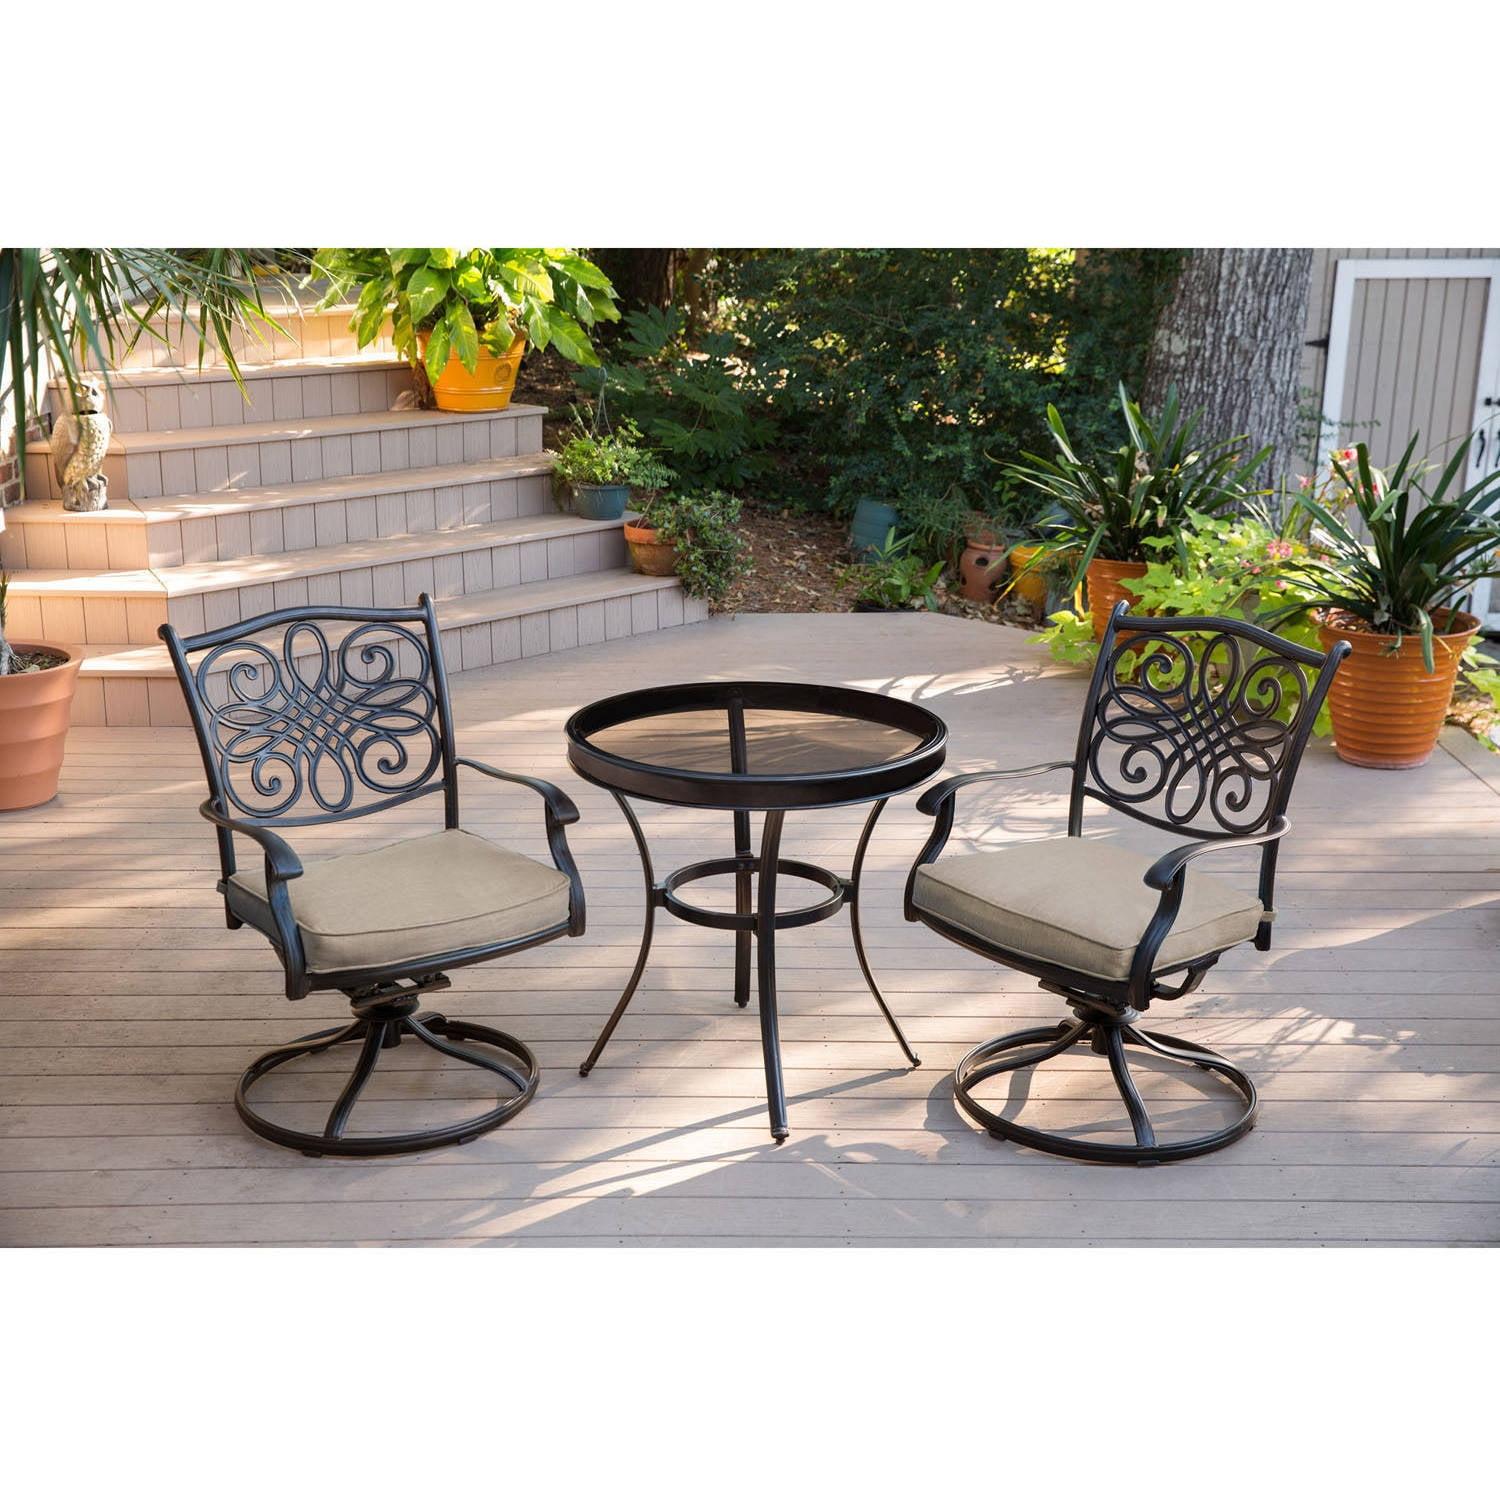 Elegant Traditions 3-Piece Bronze Bistro Set with Swivel Chairs and Glass-top Table